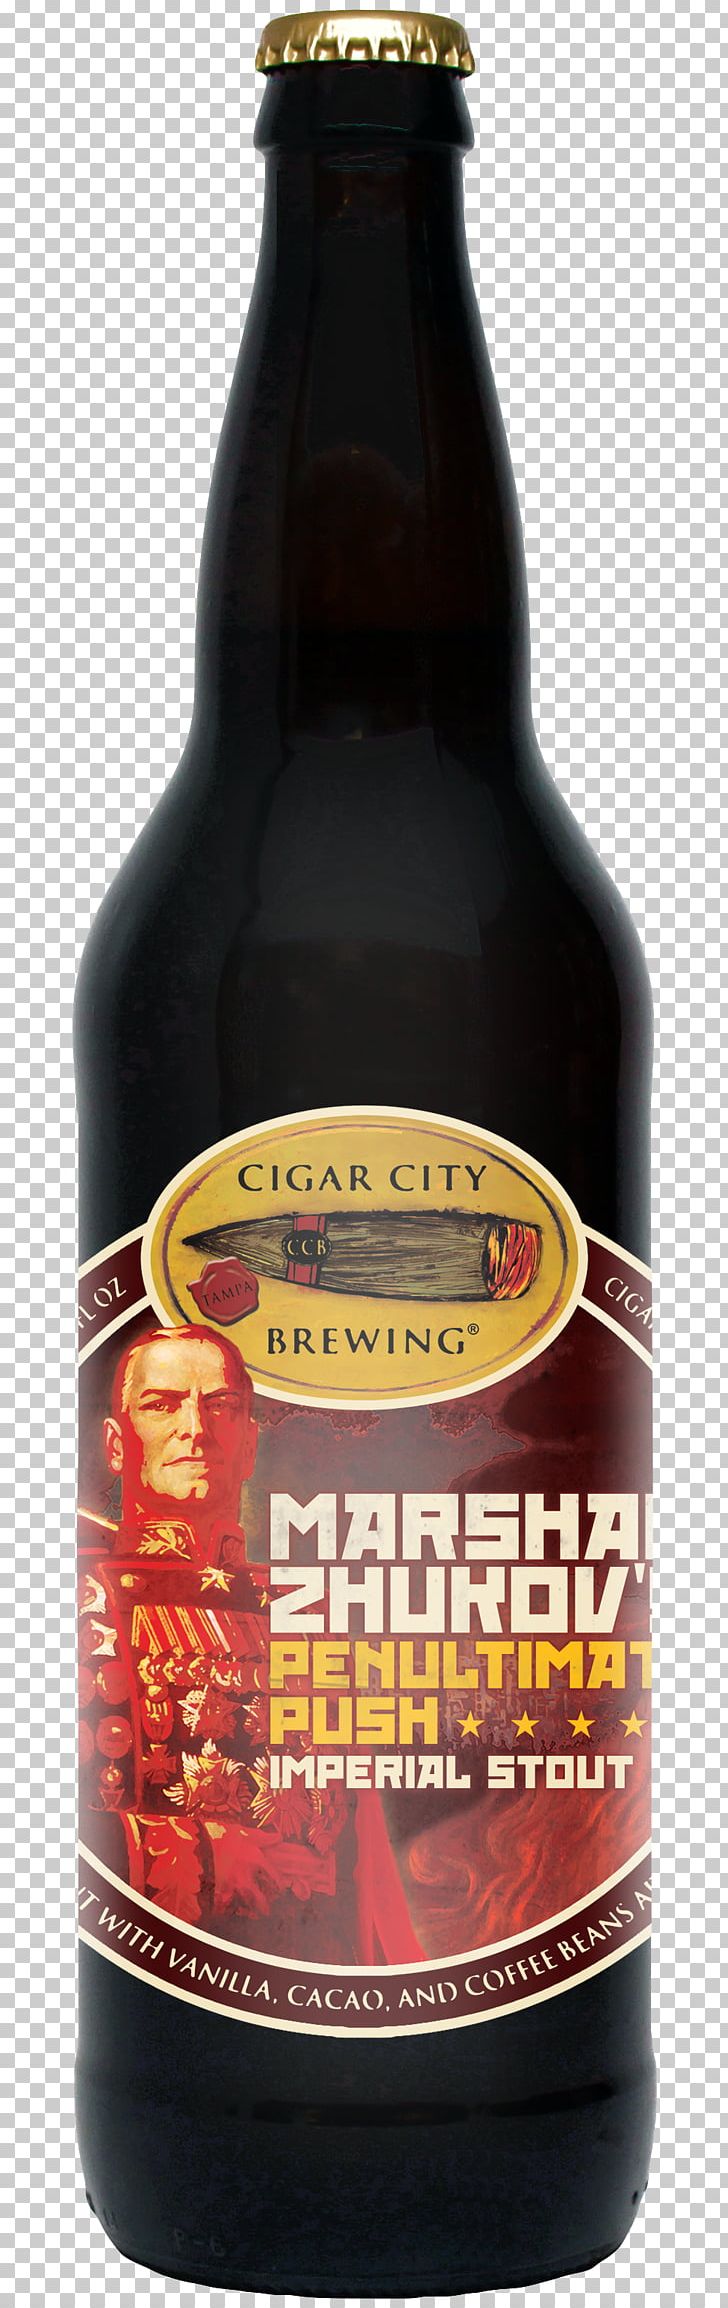 Georgy Zhukov Ale Cigar City Brewing Company Beer Russian Imperial Stout PNG, Clipart, Alcohol By Volume, Ale, Barrel, Beer, Beer Bottle Free PNG Download